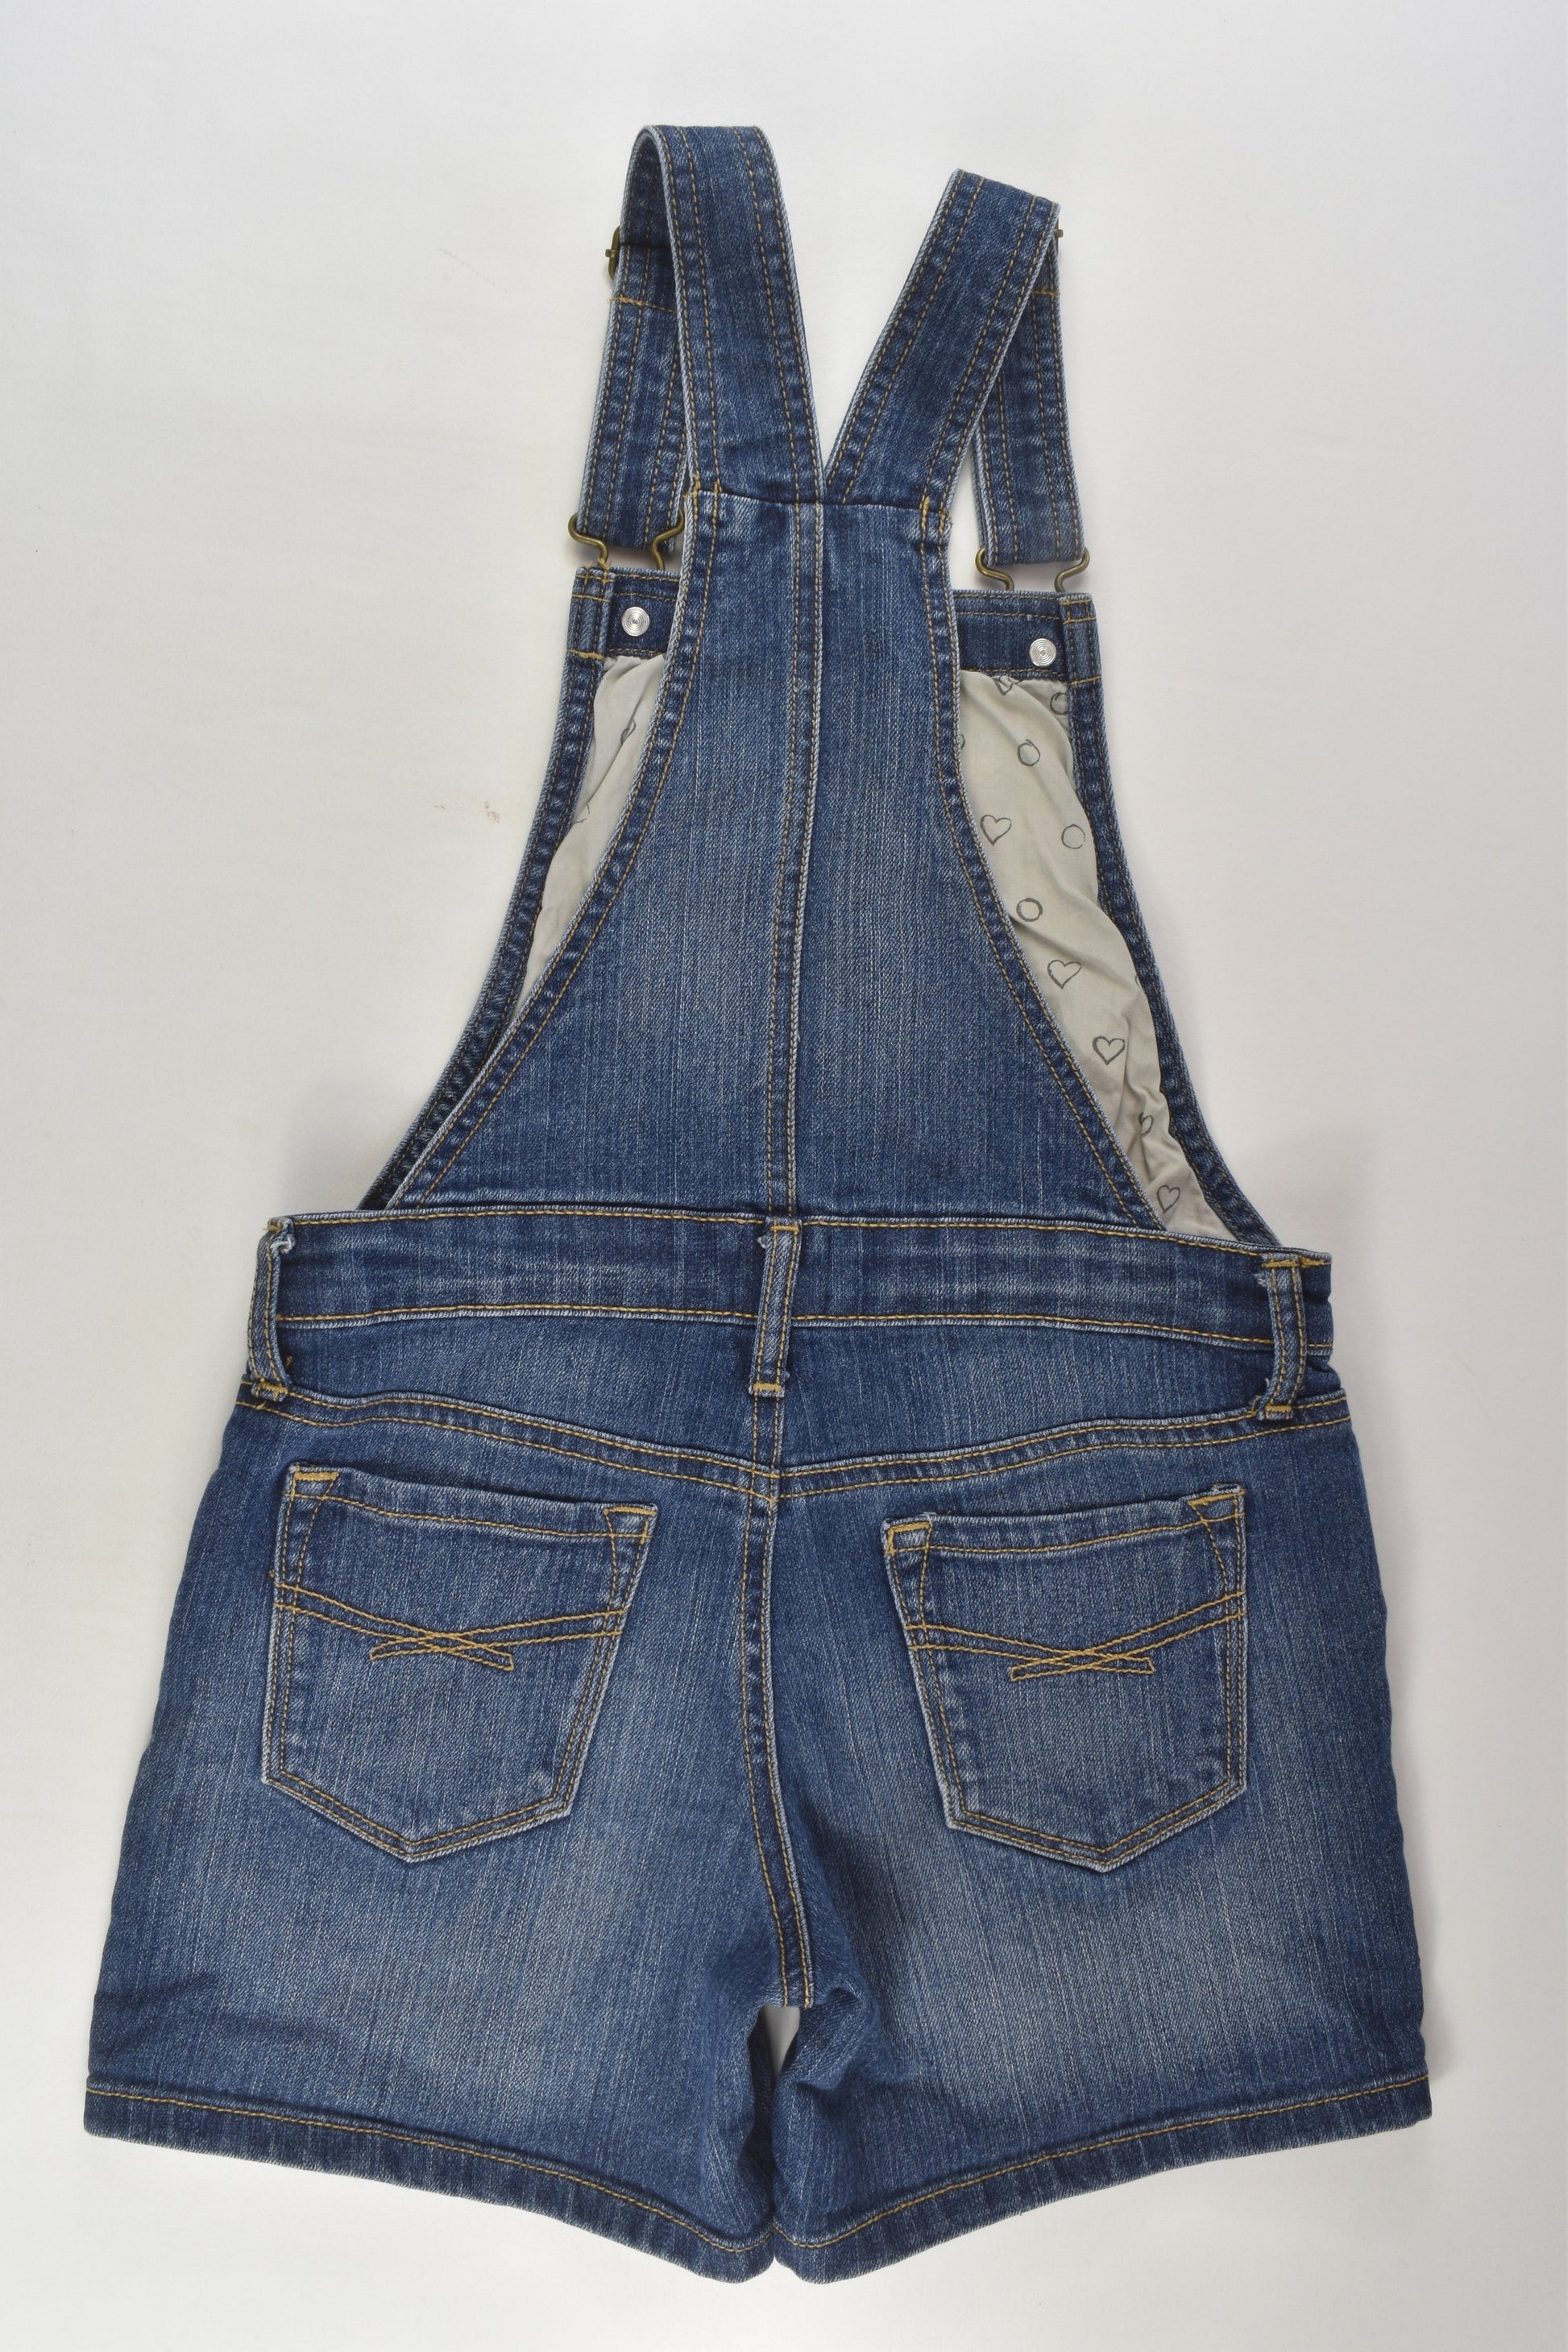 Buy Gap Denim Overalls (4-13yrs) from the Gap online shop